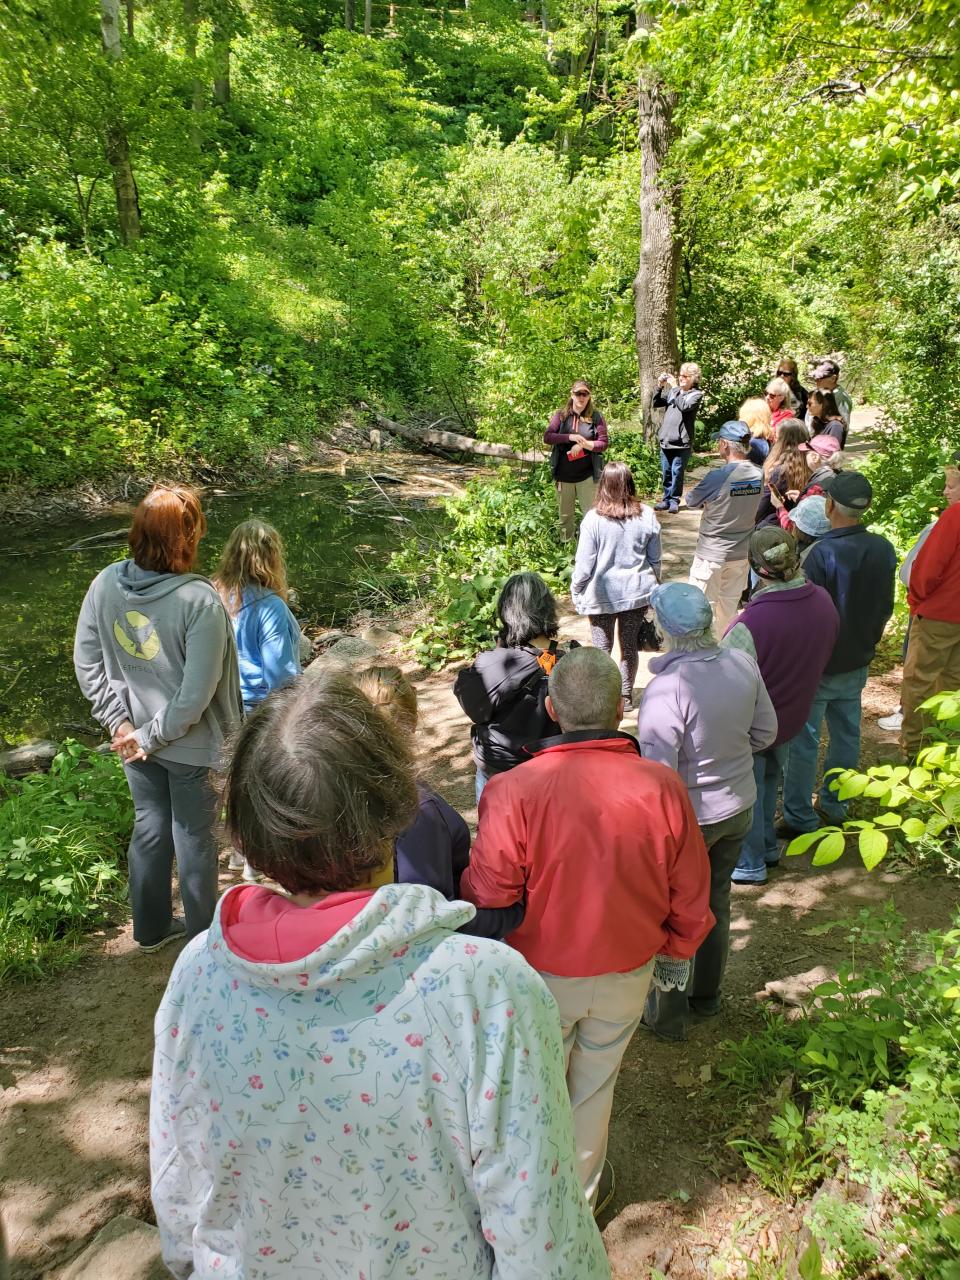 The Suburban Soles event series in South Milwaukee offers free guided walks through Grant Park with experts in various fields from plants and fungi to history.